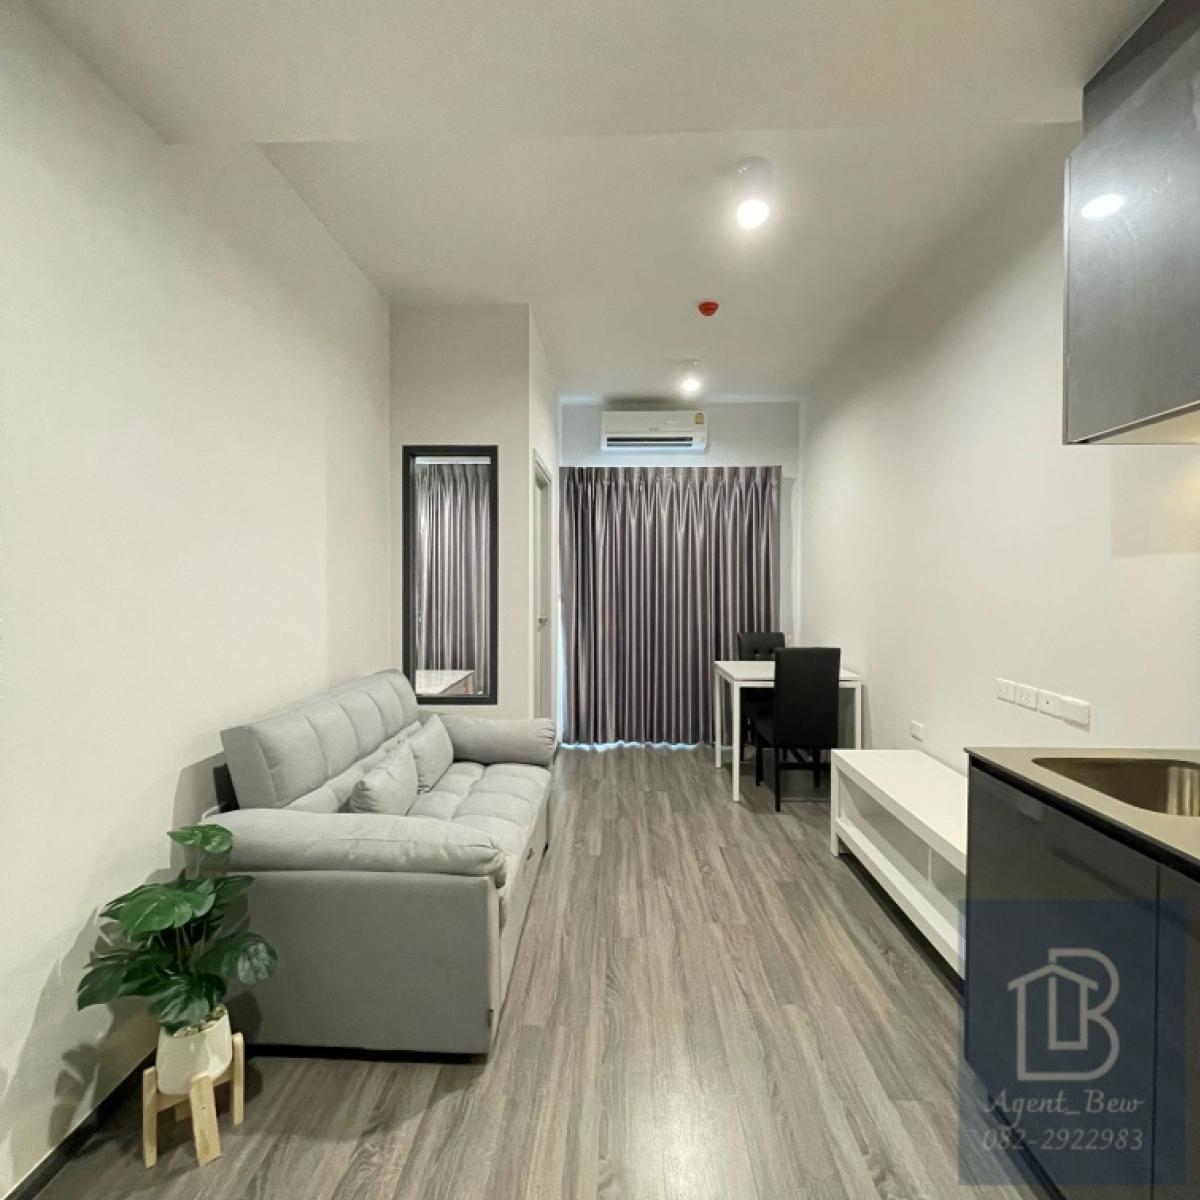 For RentCondoSiam Paragon ,Chulalongkorn,Samyan : ✅Available✅Ideo Chula - Samyan 1 Bedroom Low Floor 23,000 THB/Month Only